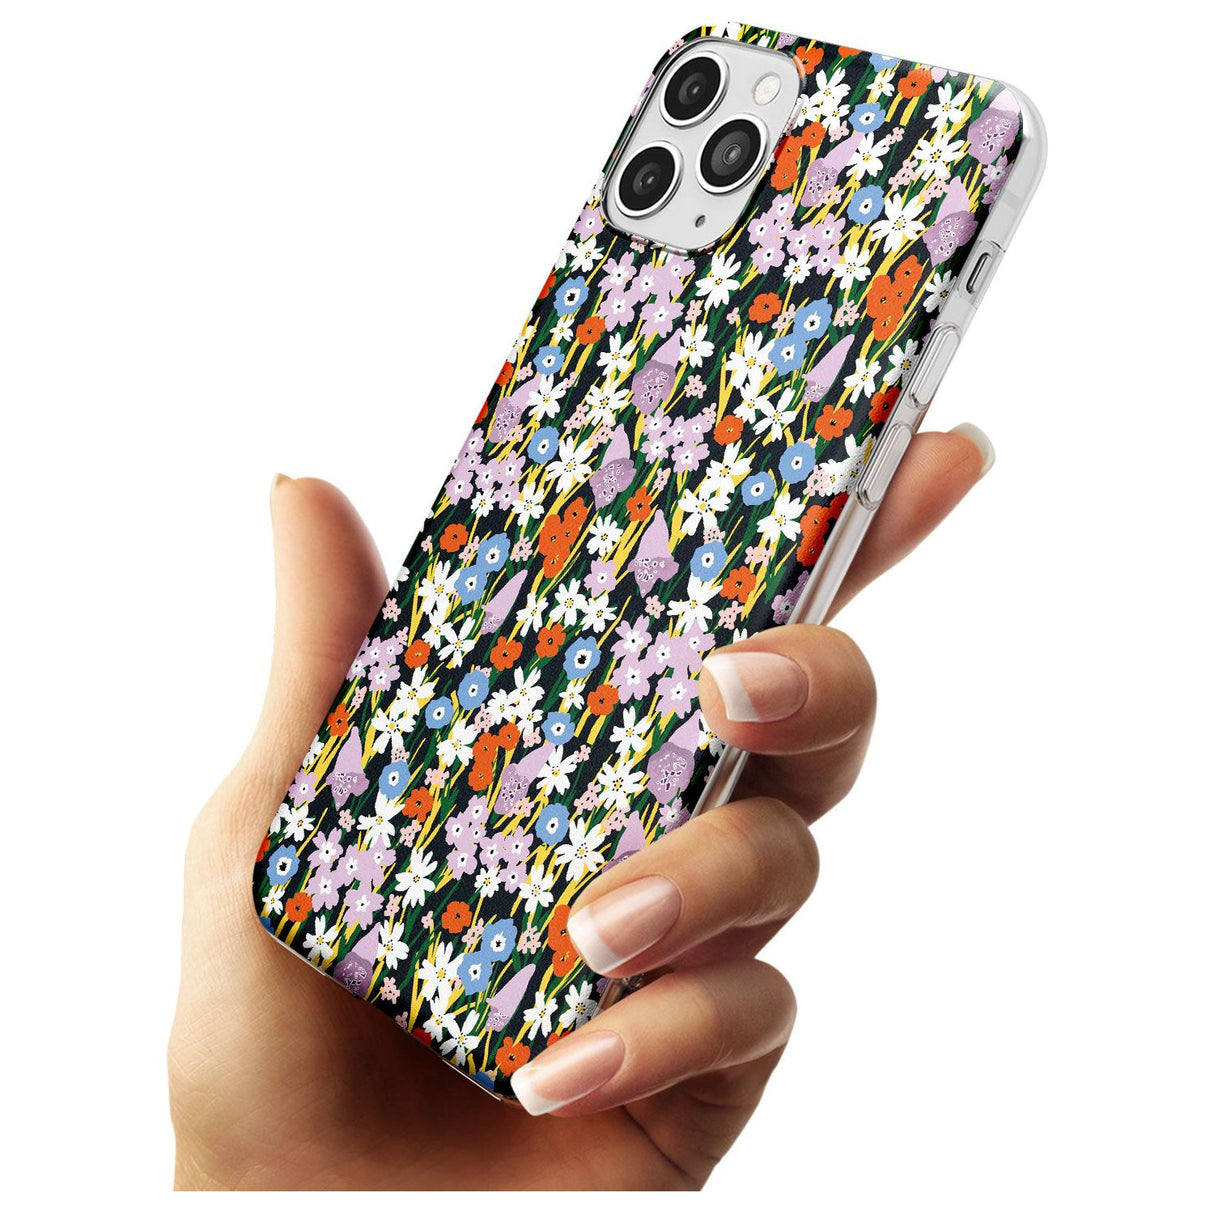 Energetic Floral Mix: Solid Black Impact Phone Case for iPhone 11 Pro Max